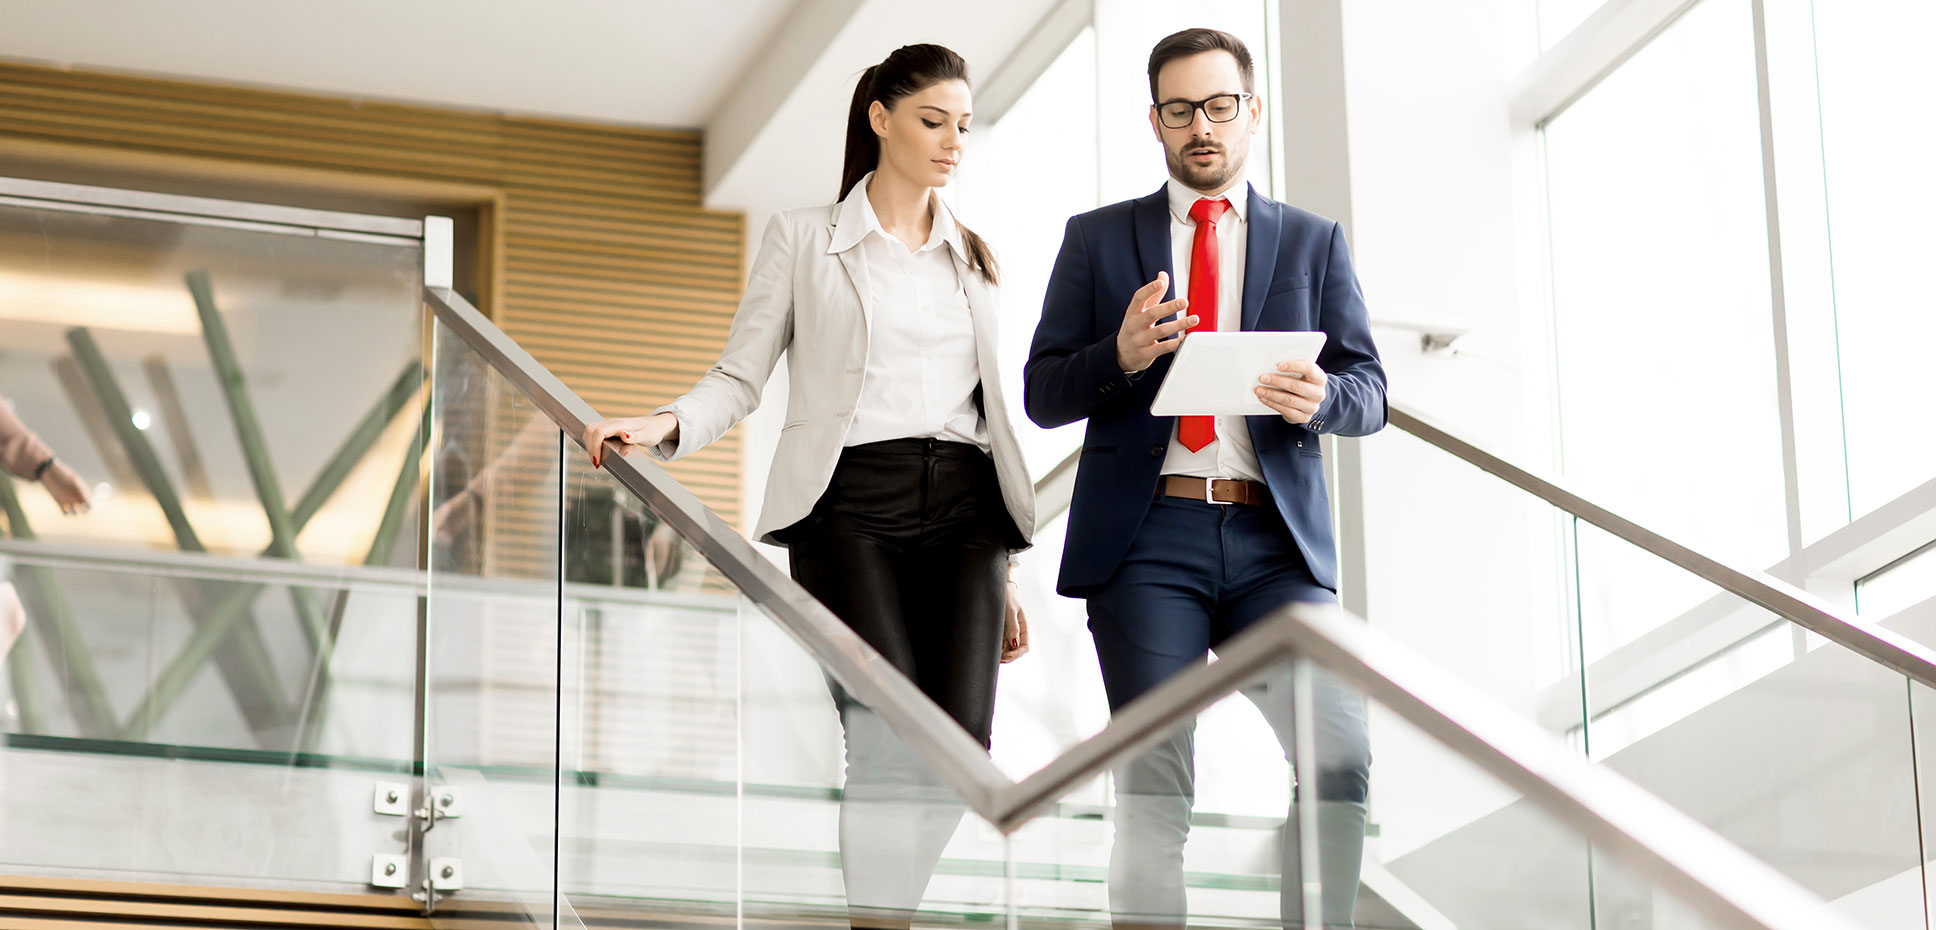 Man and woman in business attire descending office staircase